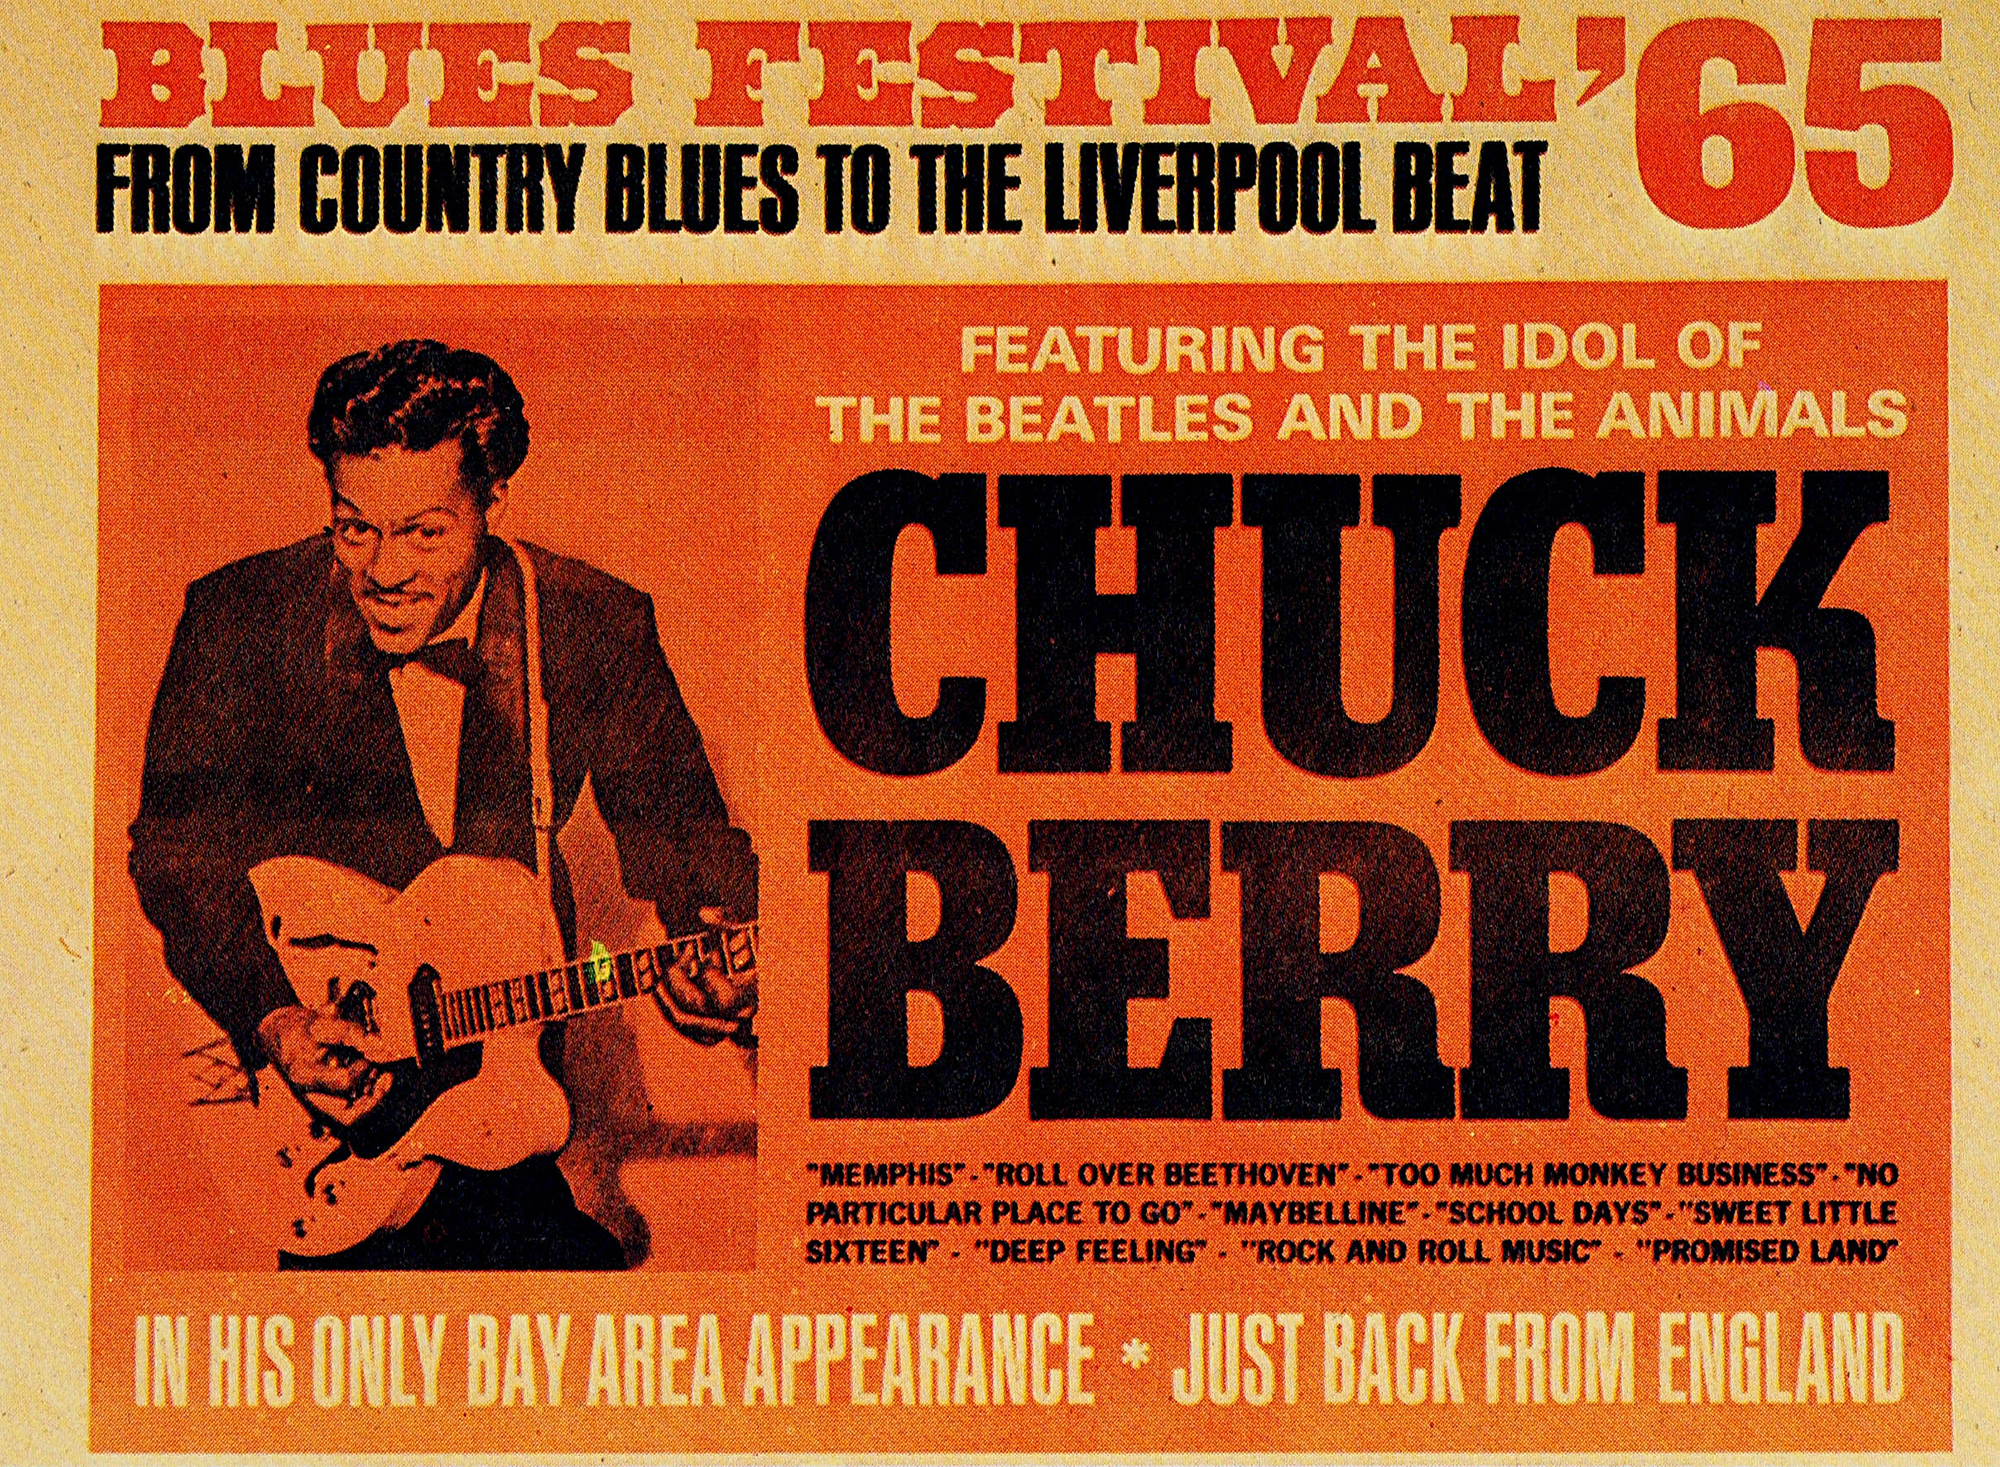 A Chuck Berry concert poster from 1965.